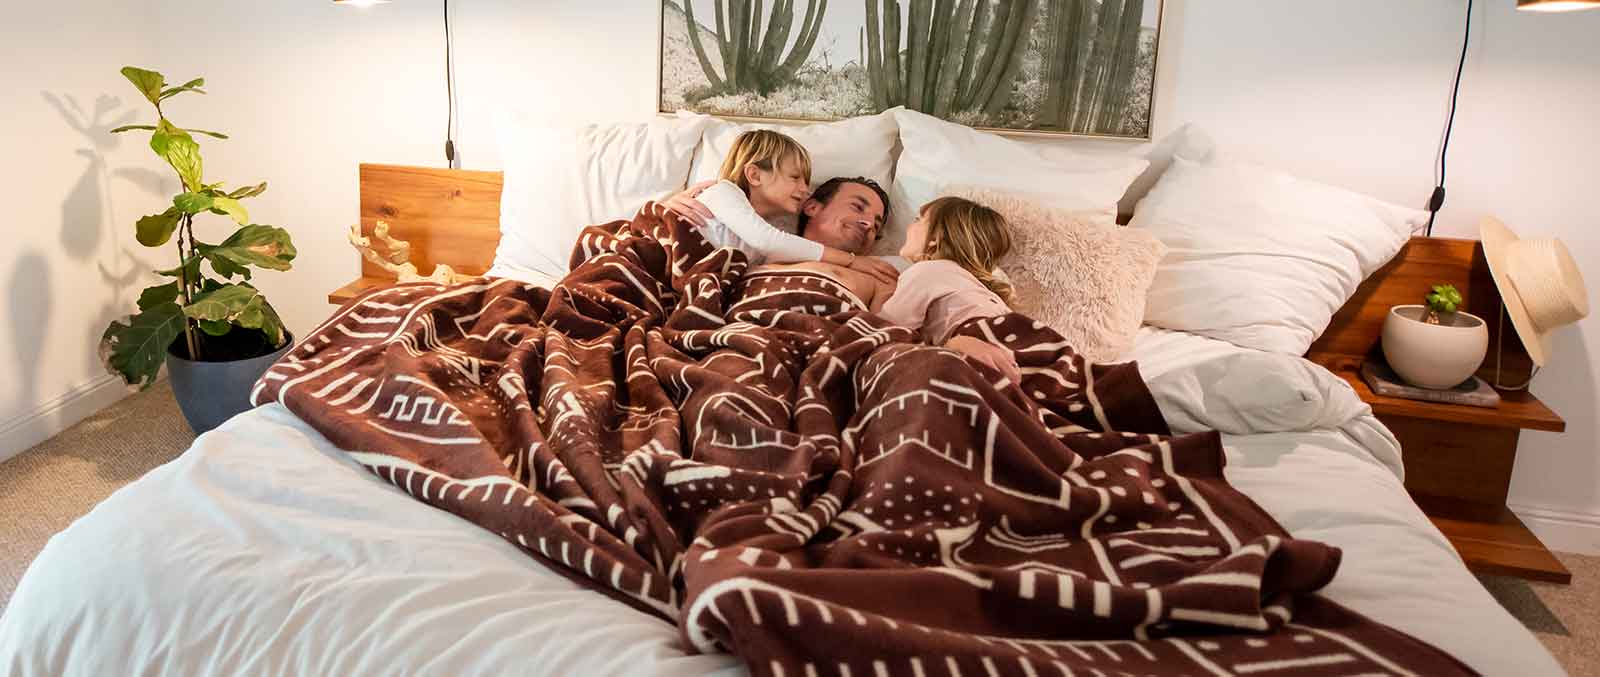 A women is sleeping on the bed with her kids in the blanket